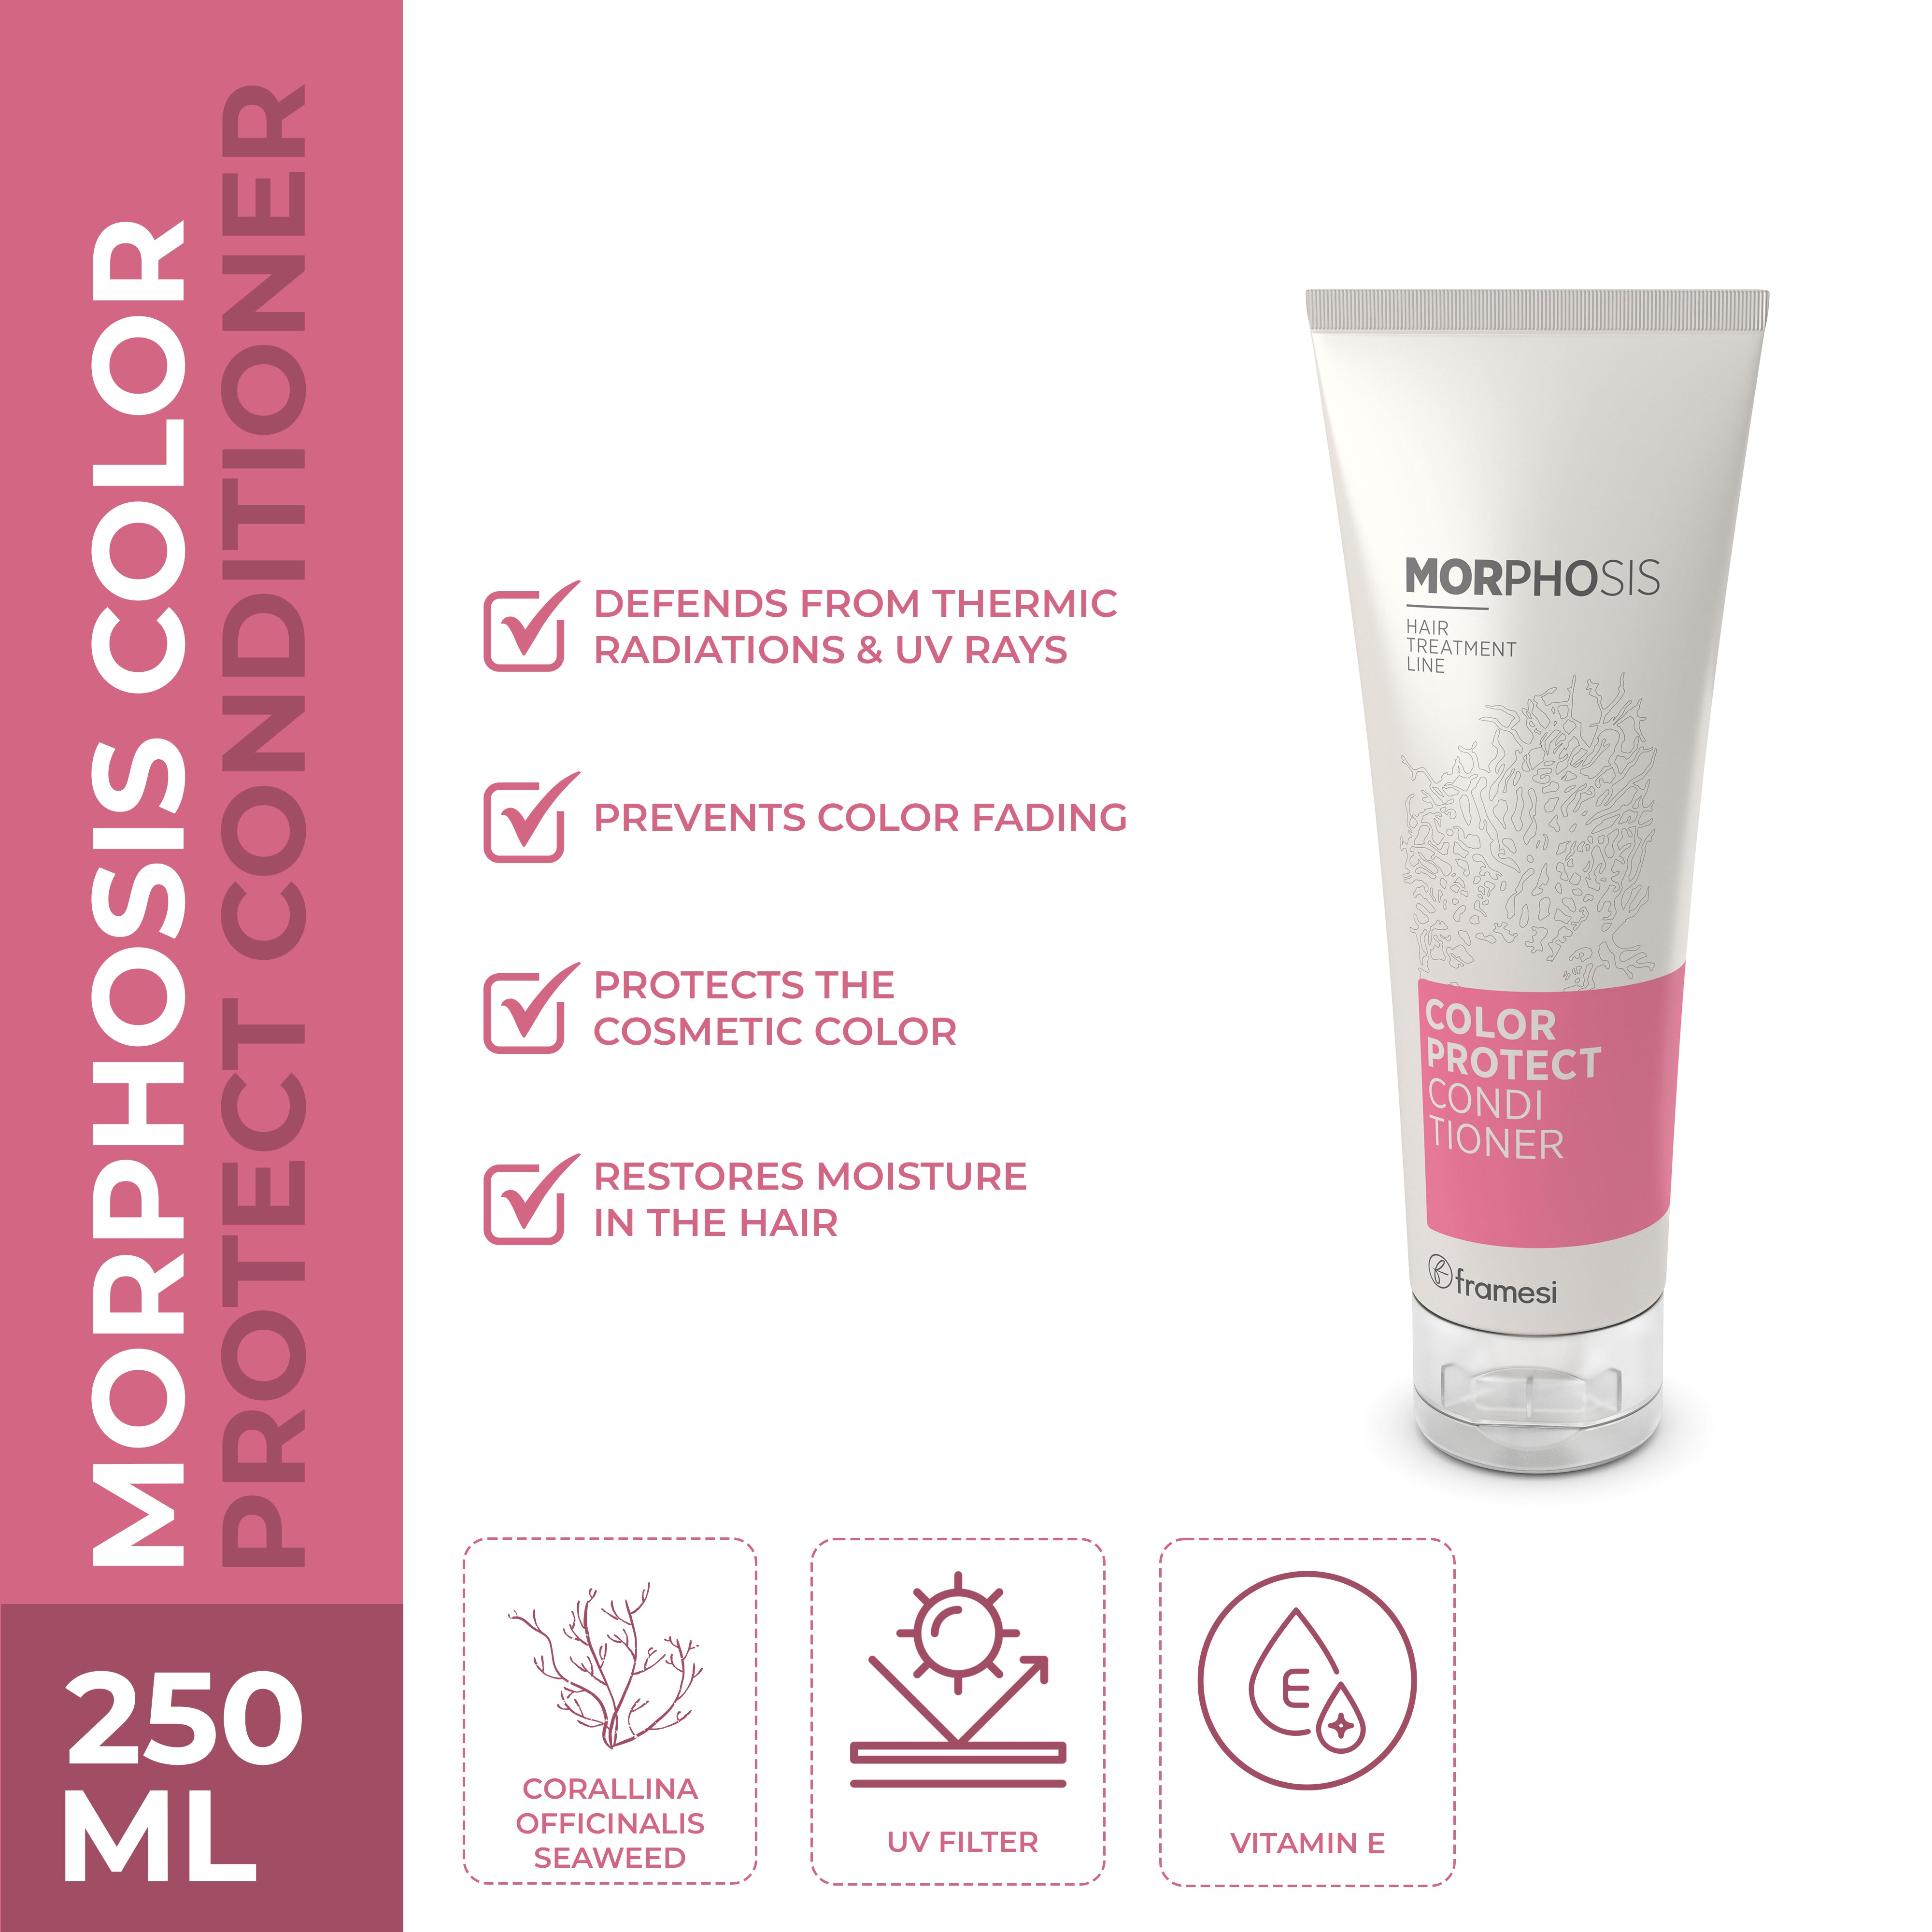 Framesi - Morphosis Color Protect Conditioner 250 ml